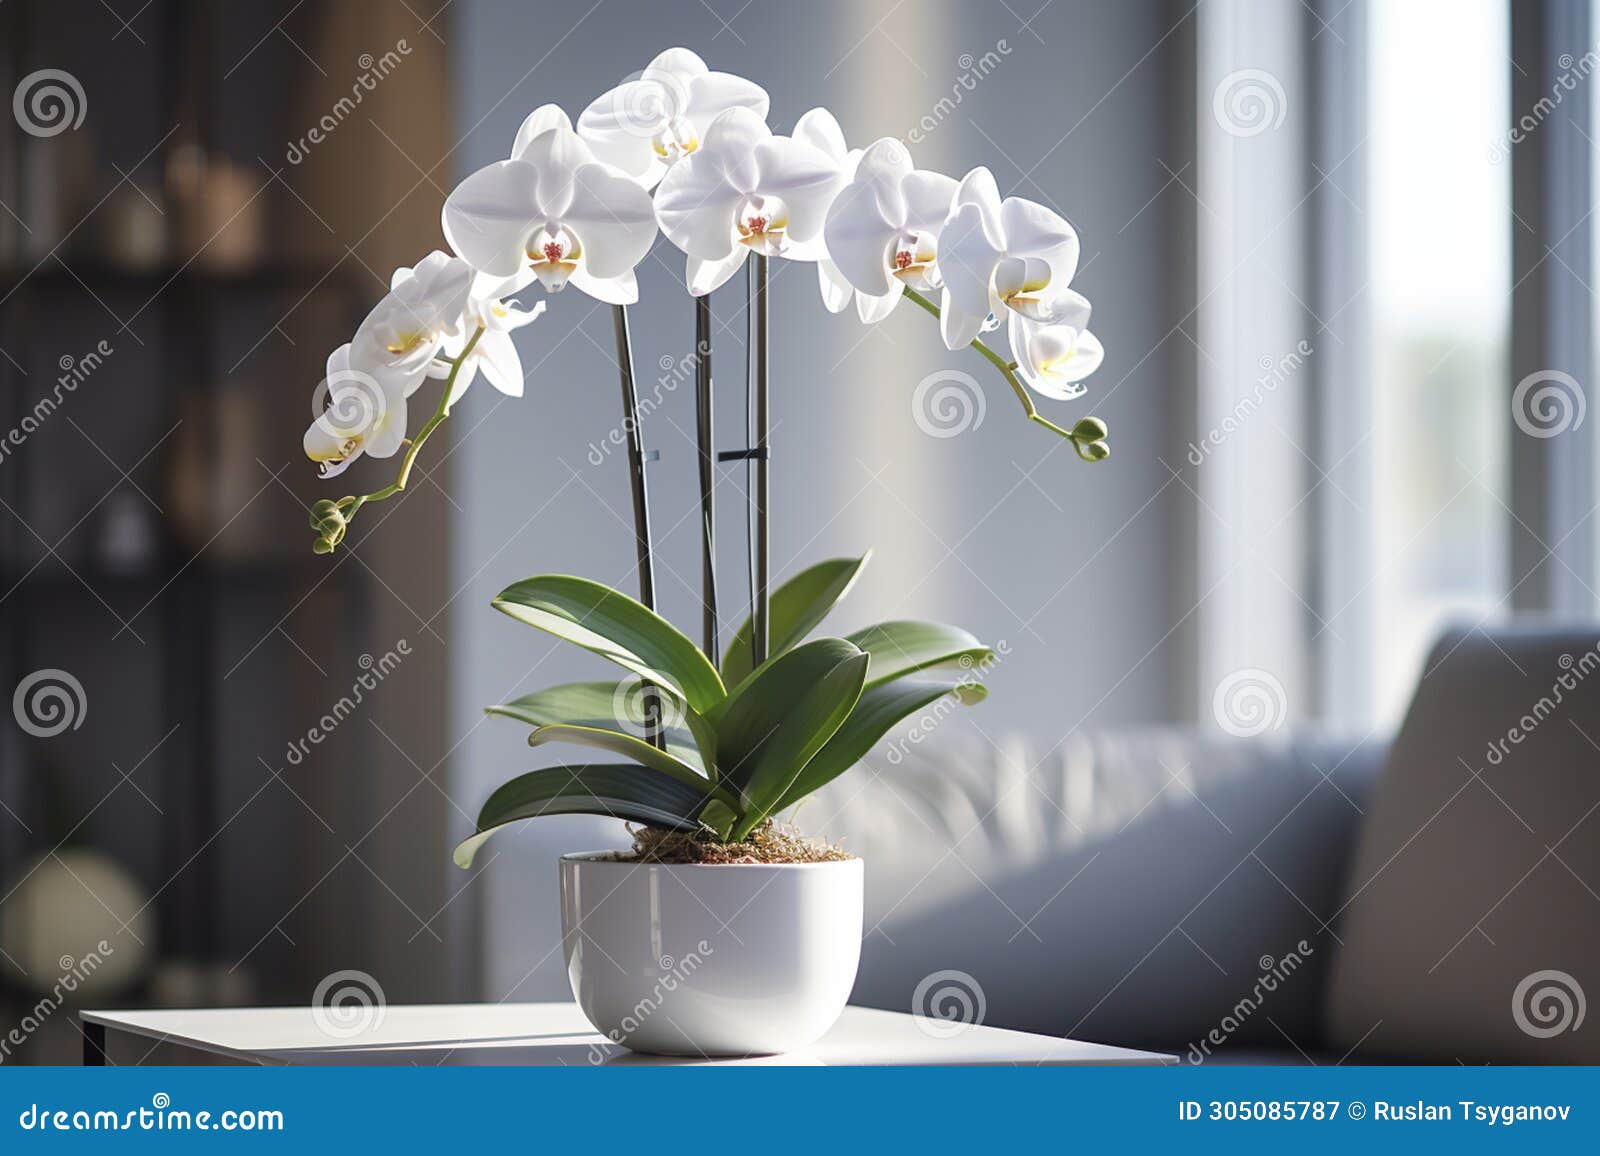 orchid, orchidaceae, flower with leaves in a pot